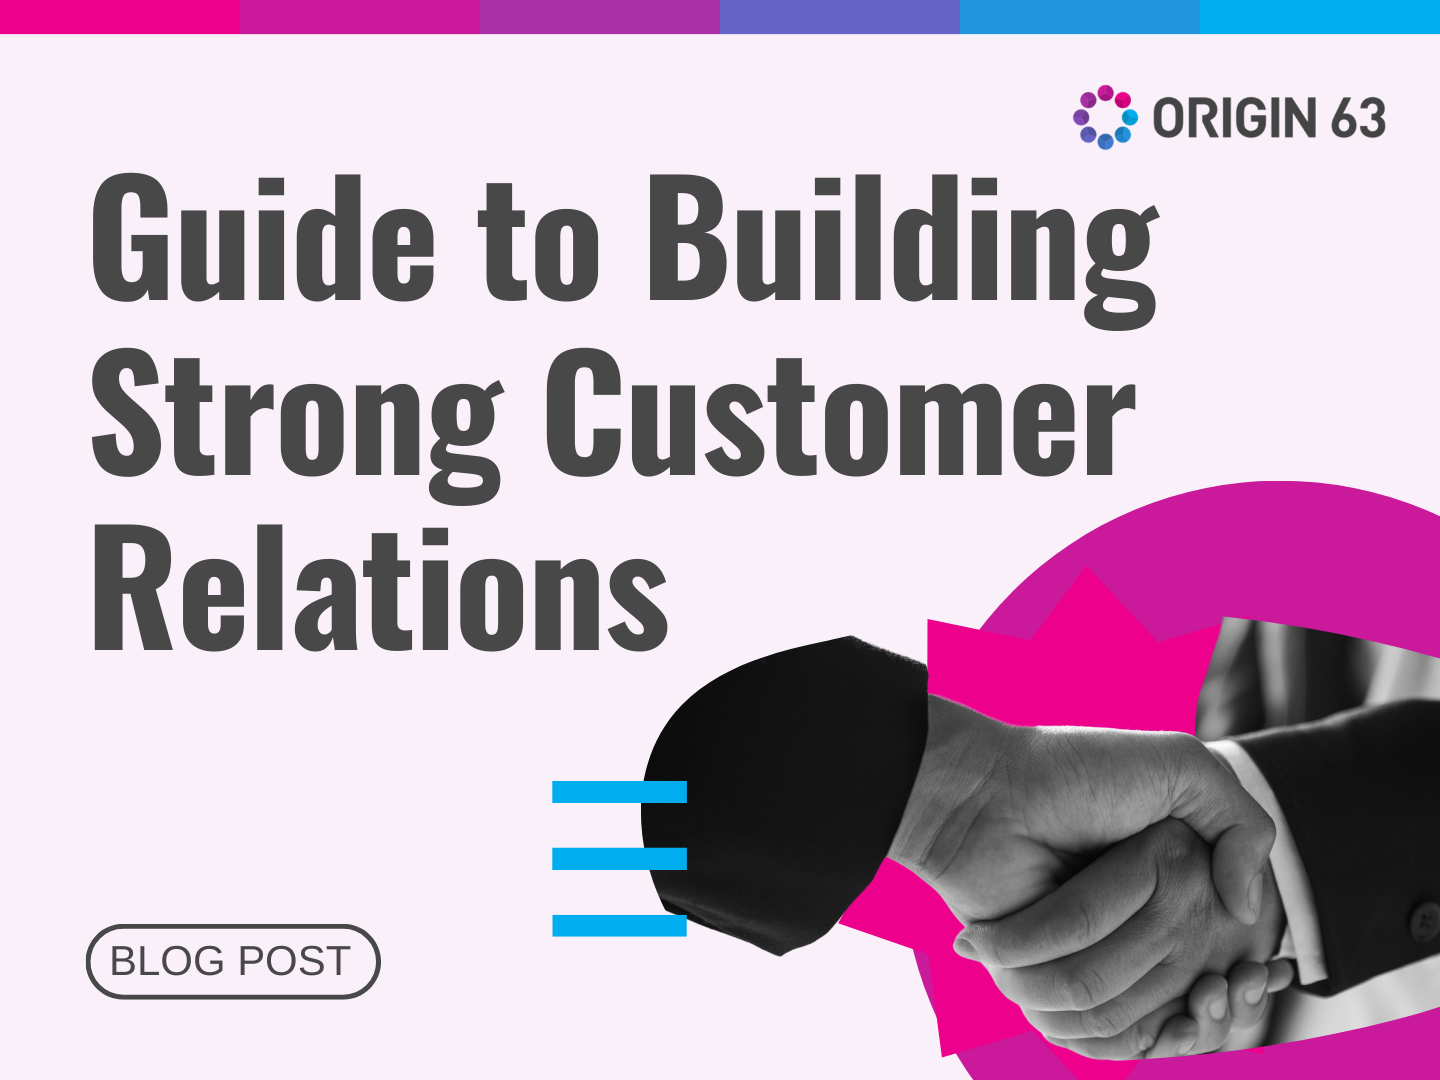 Guide to Building Strong Customer Relations